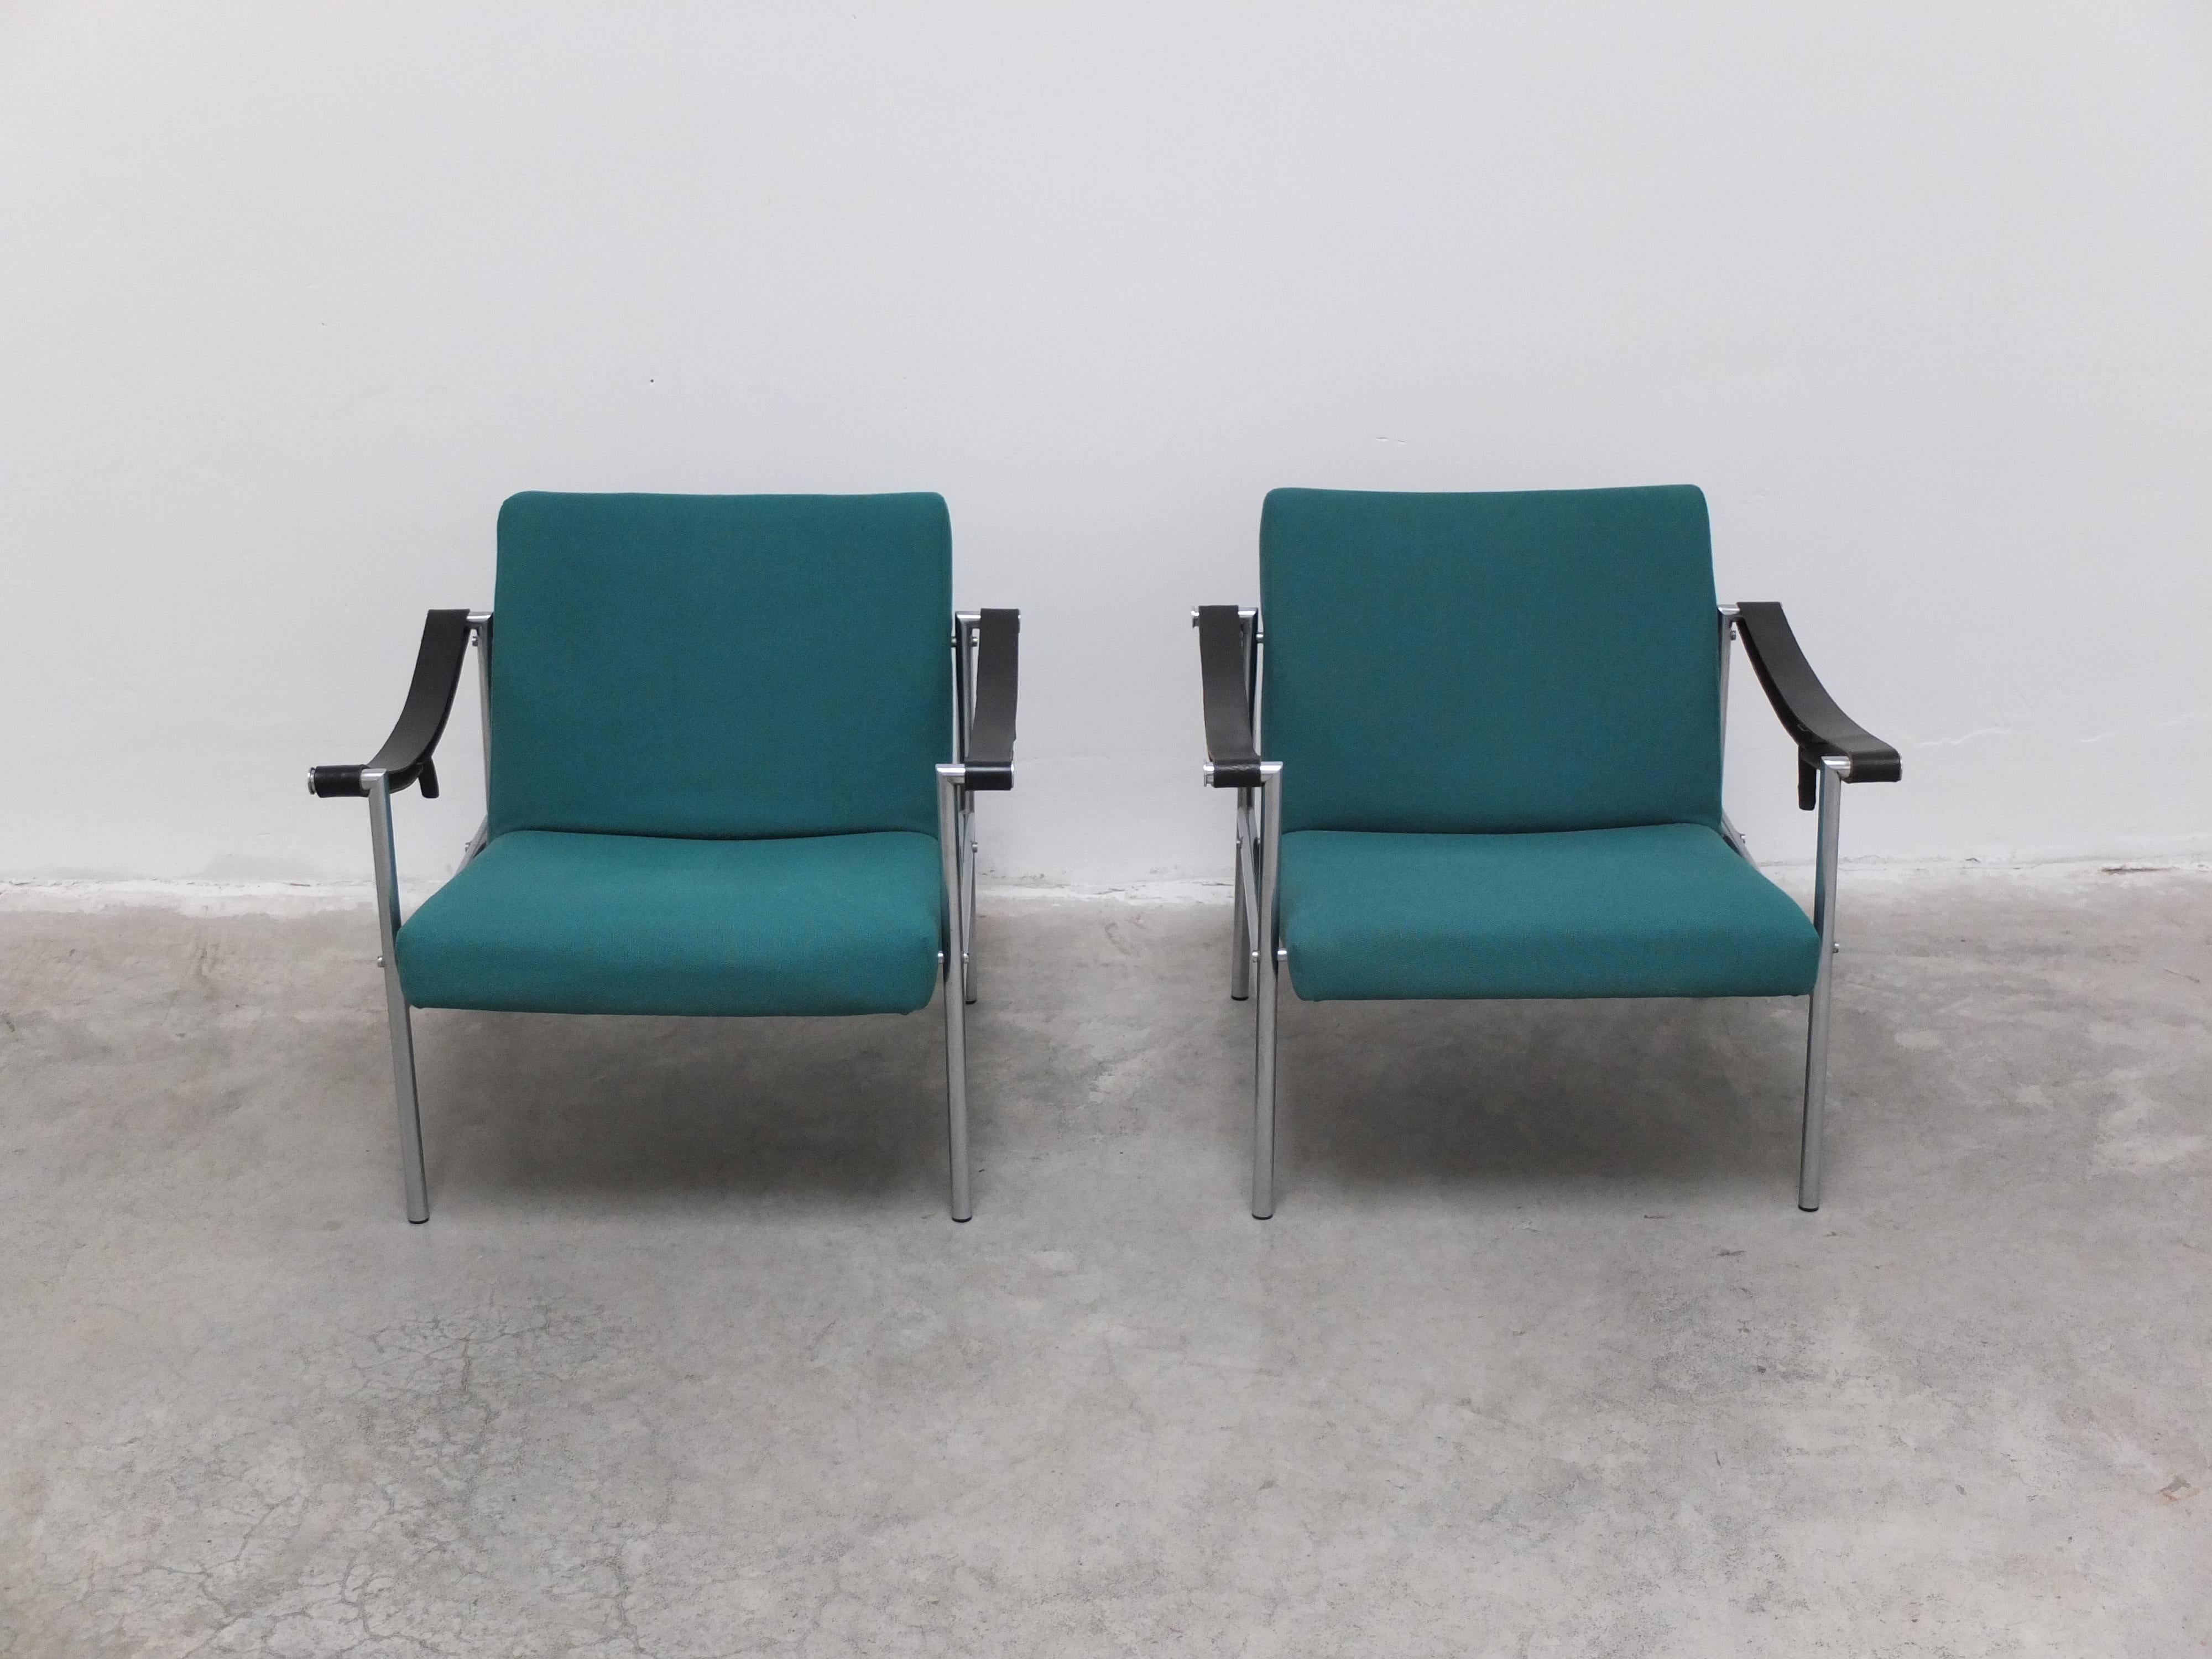 Mid-Century Modern Pair of 'SZ08' Lounge Chairs by Martin Visser for 't Spectrum, 1960 For Sale